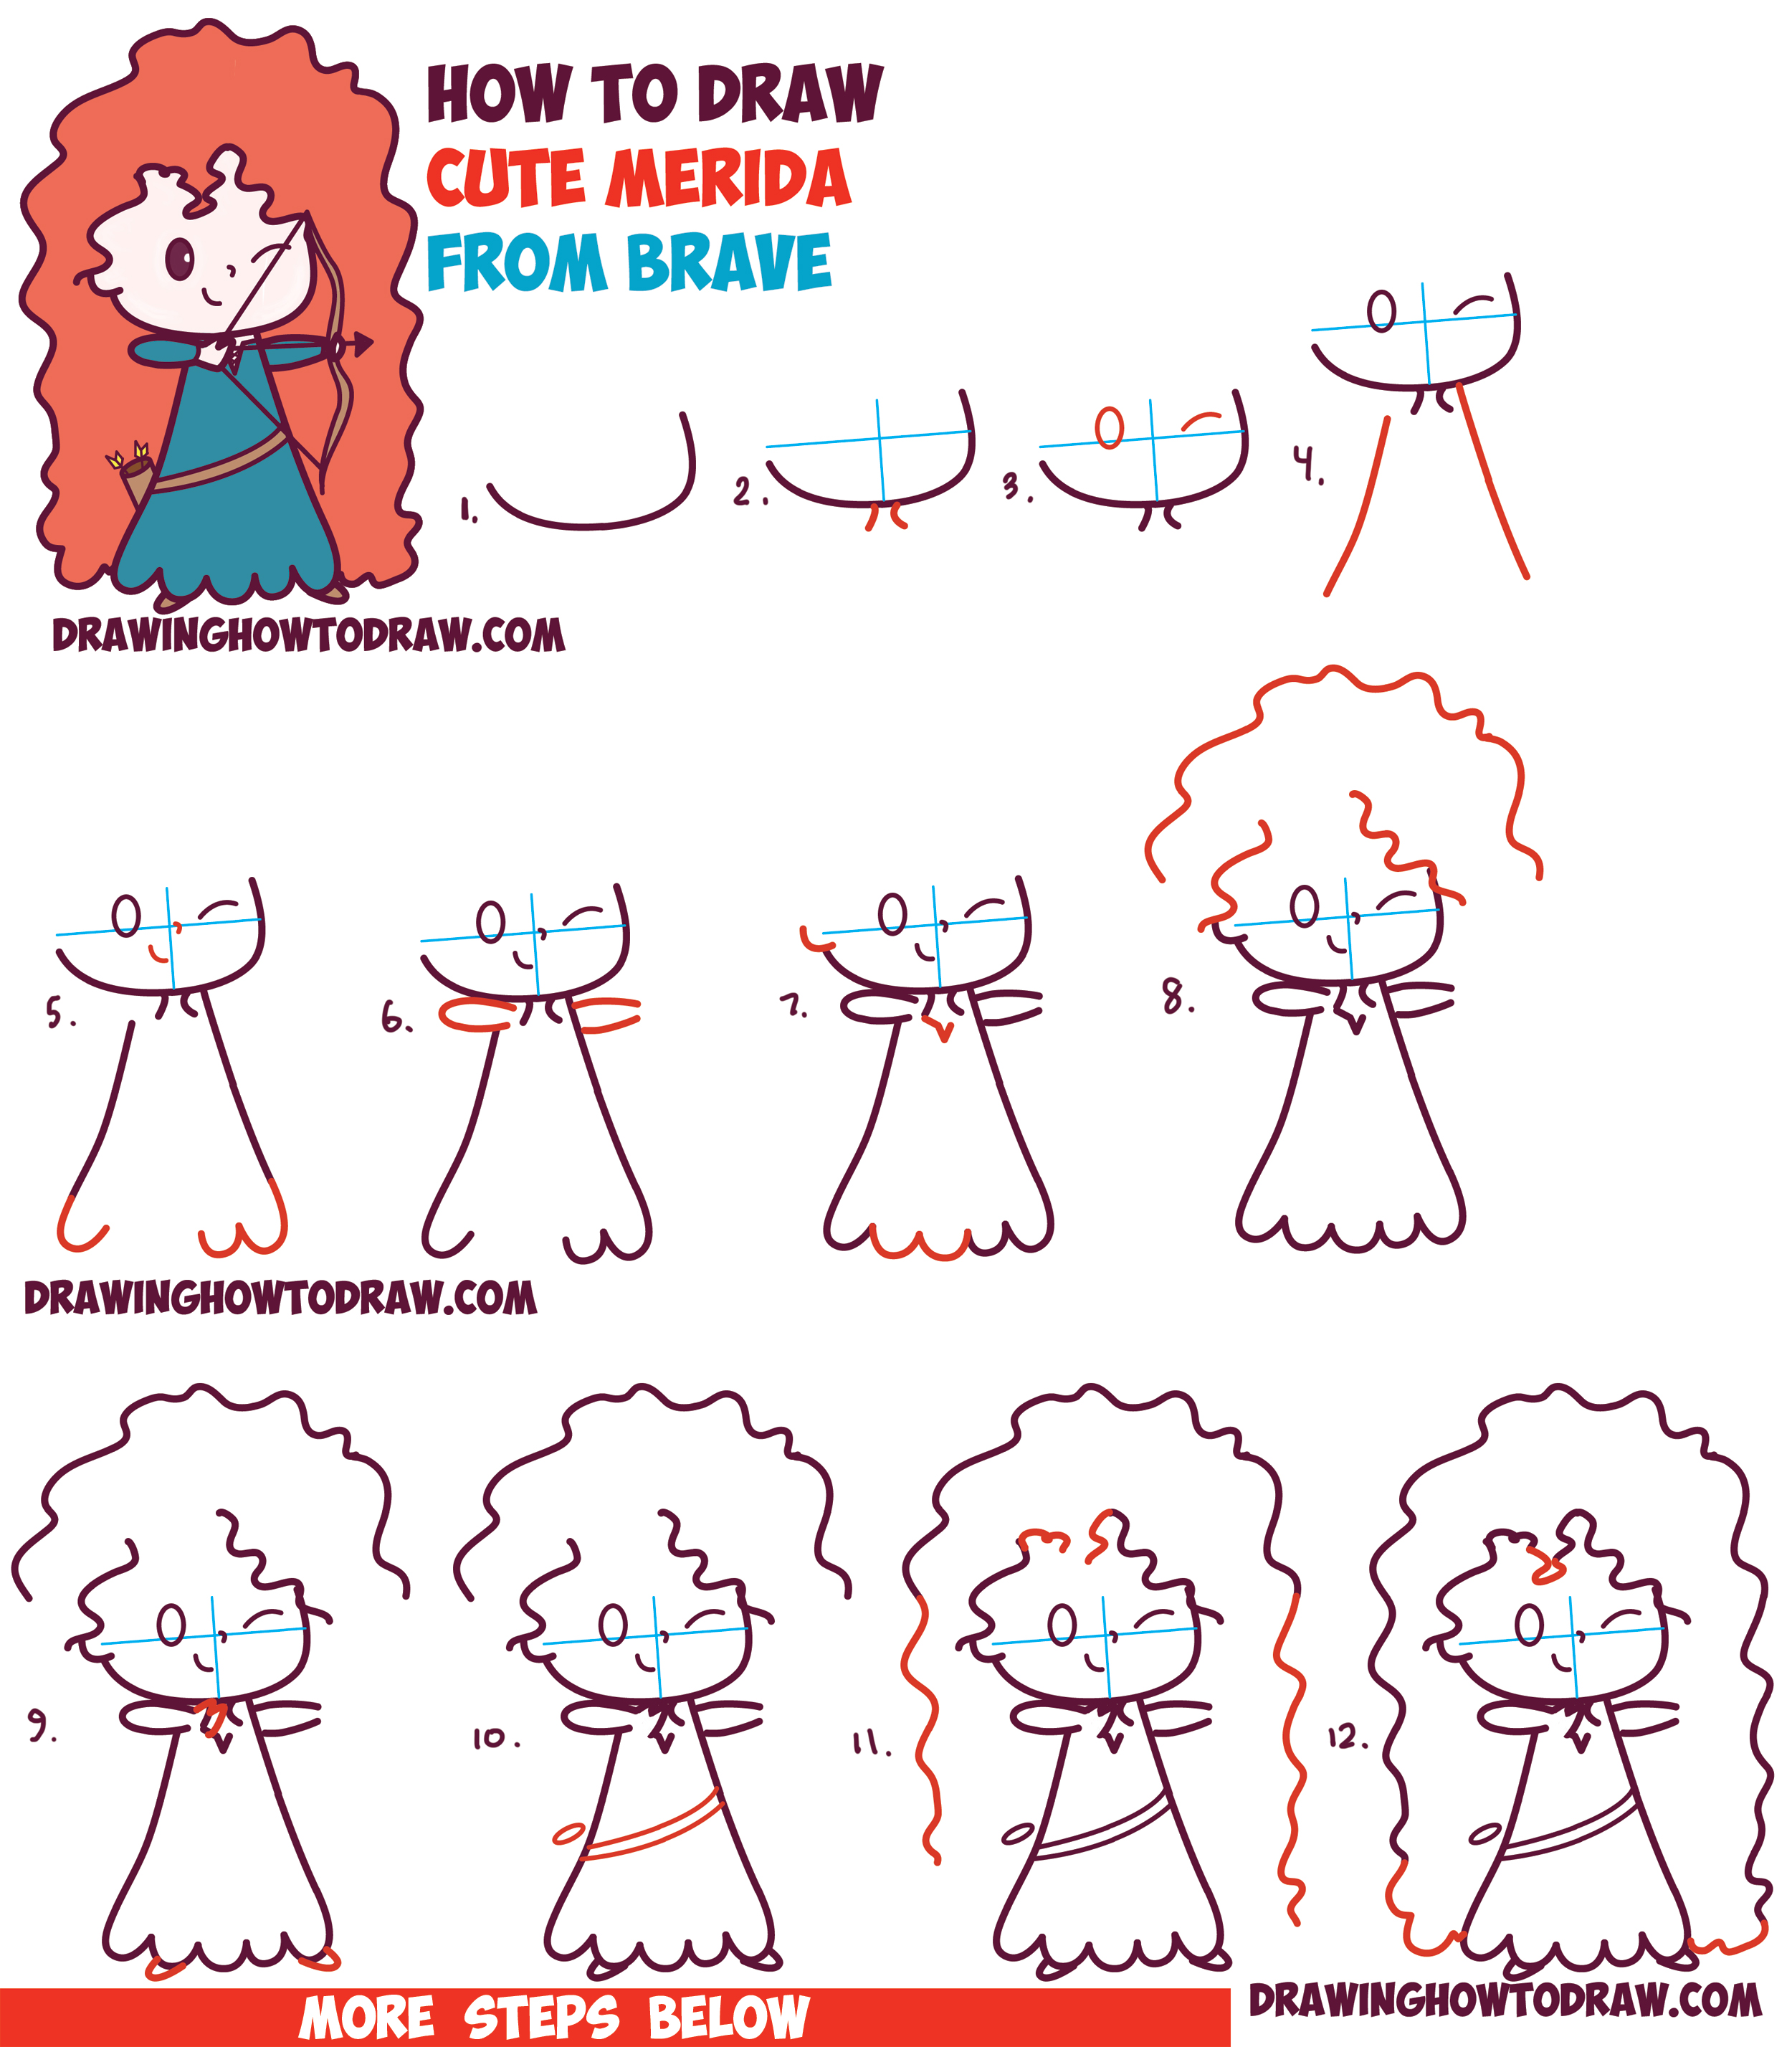 Best How To Draw Cartoon Characters Step By Step From Disney in the world Learn more here 